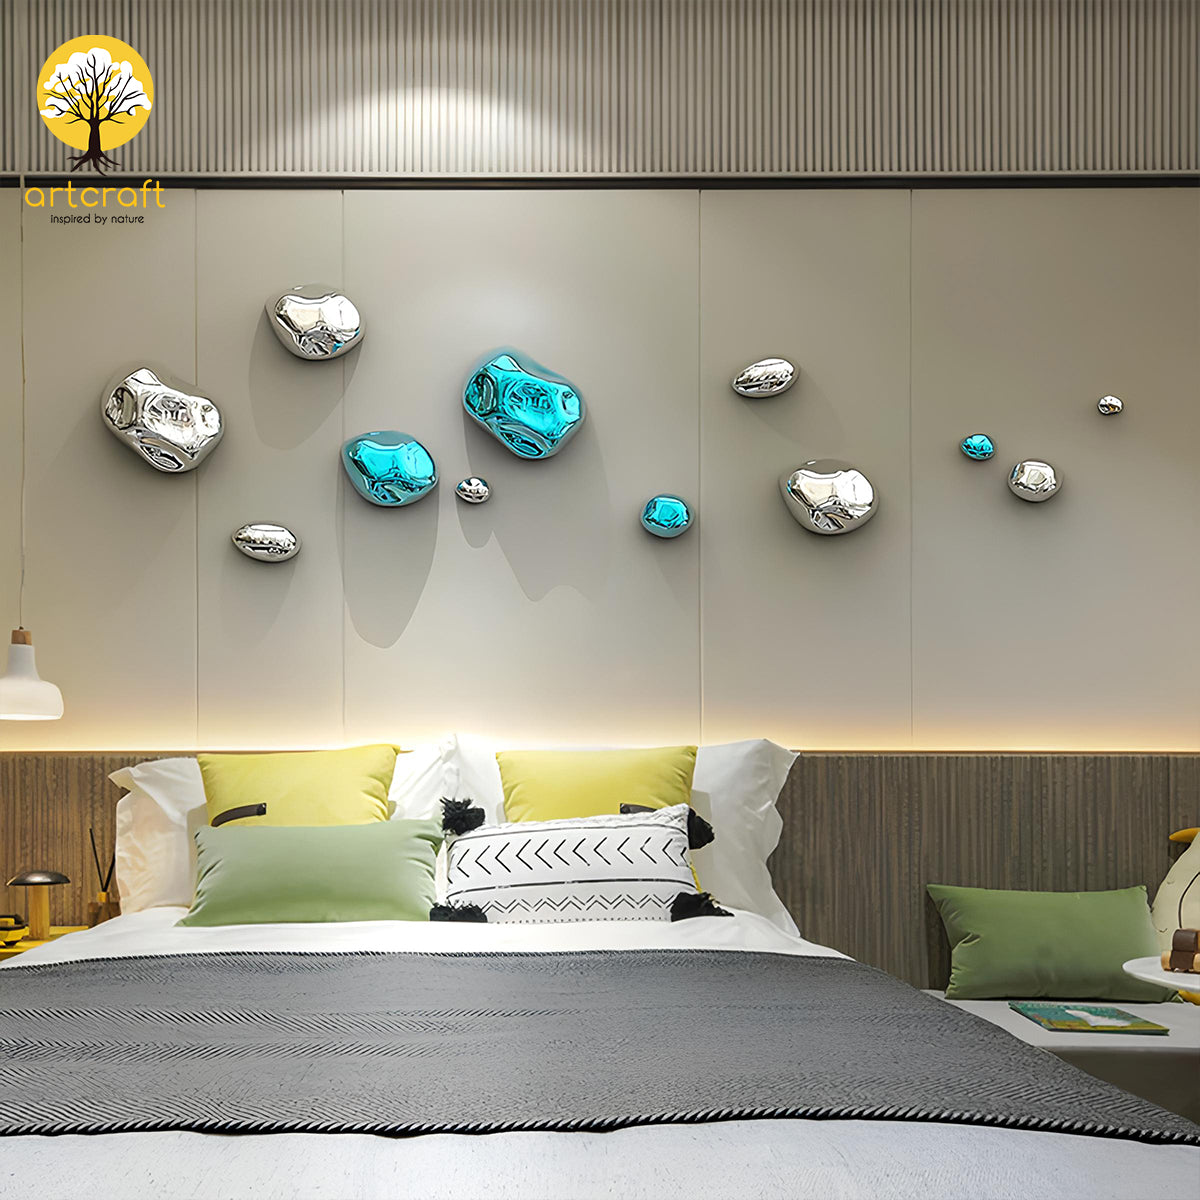 Pebbles wall decor - 100% Made in Pure Brass